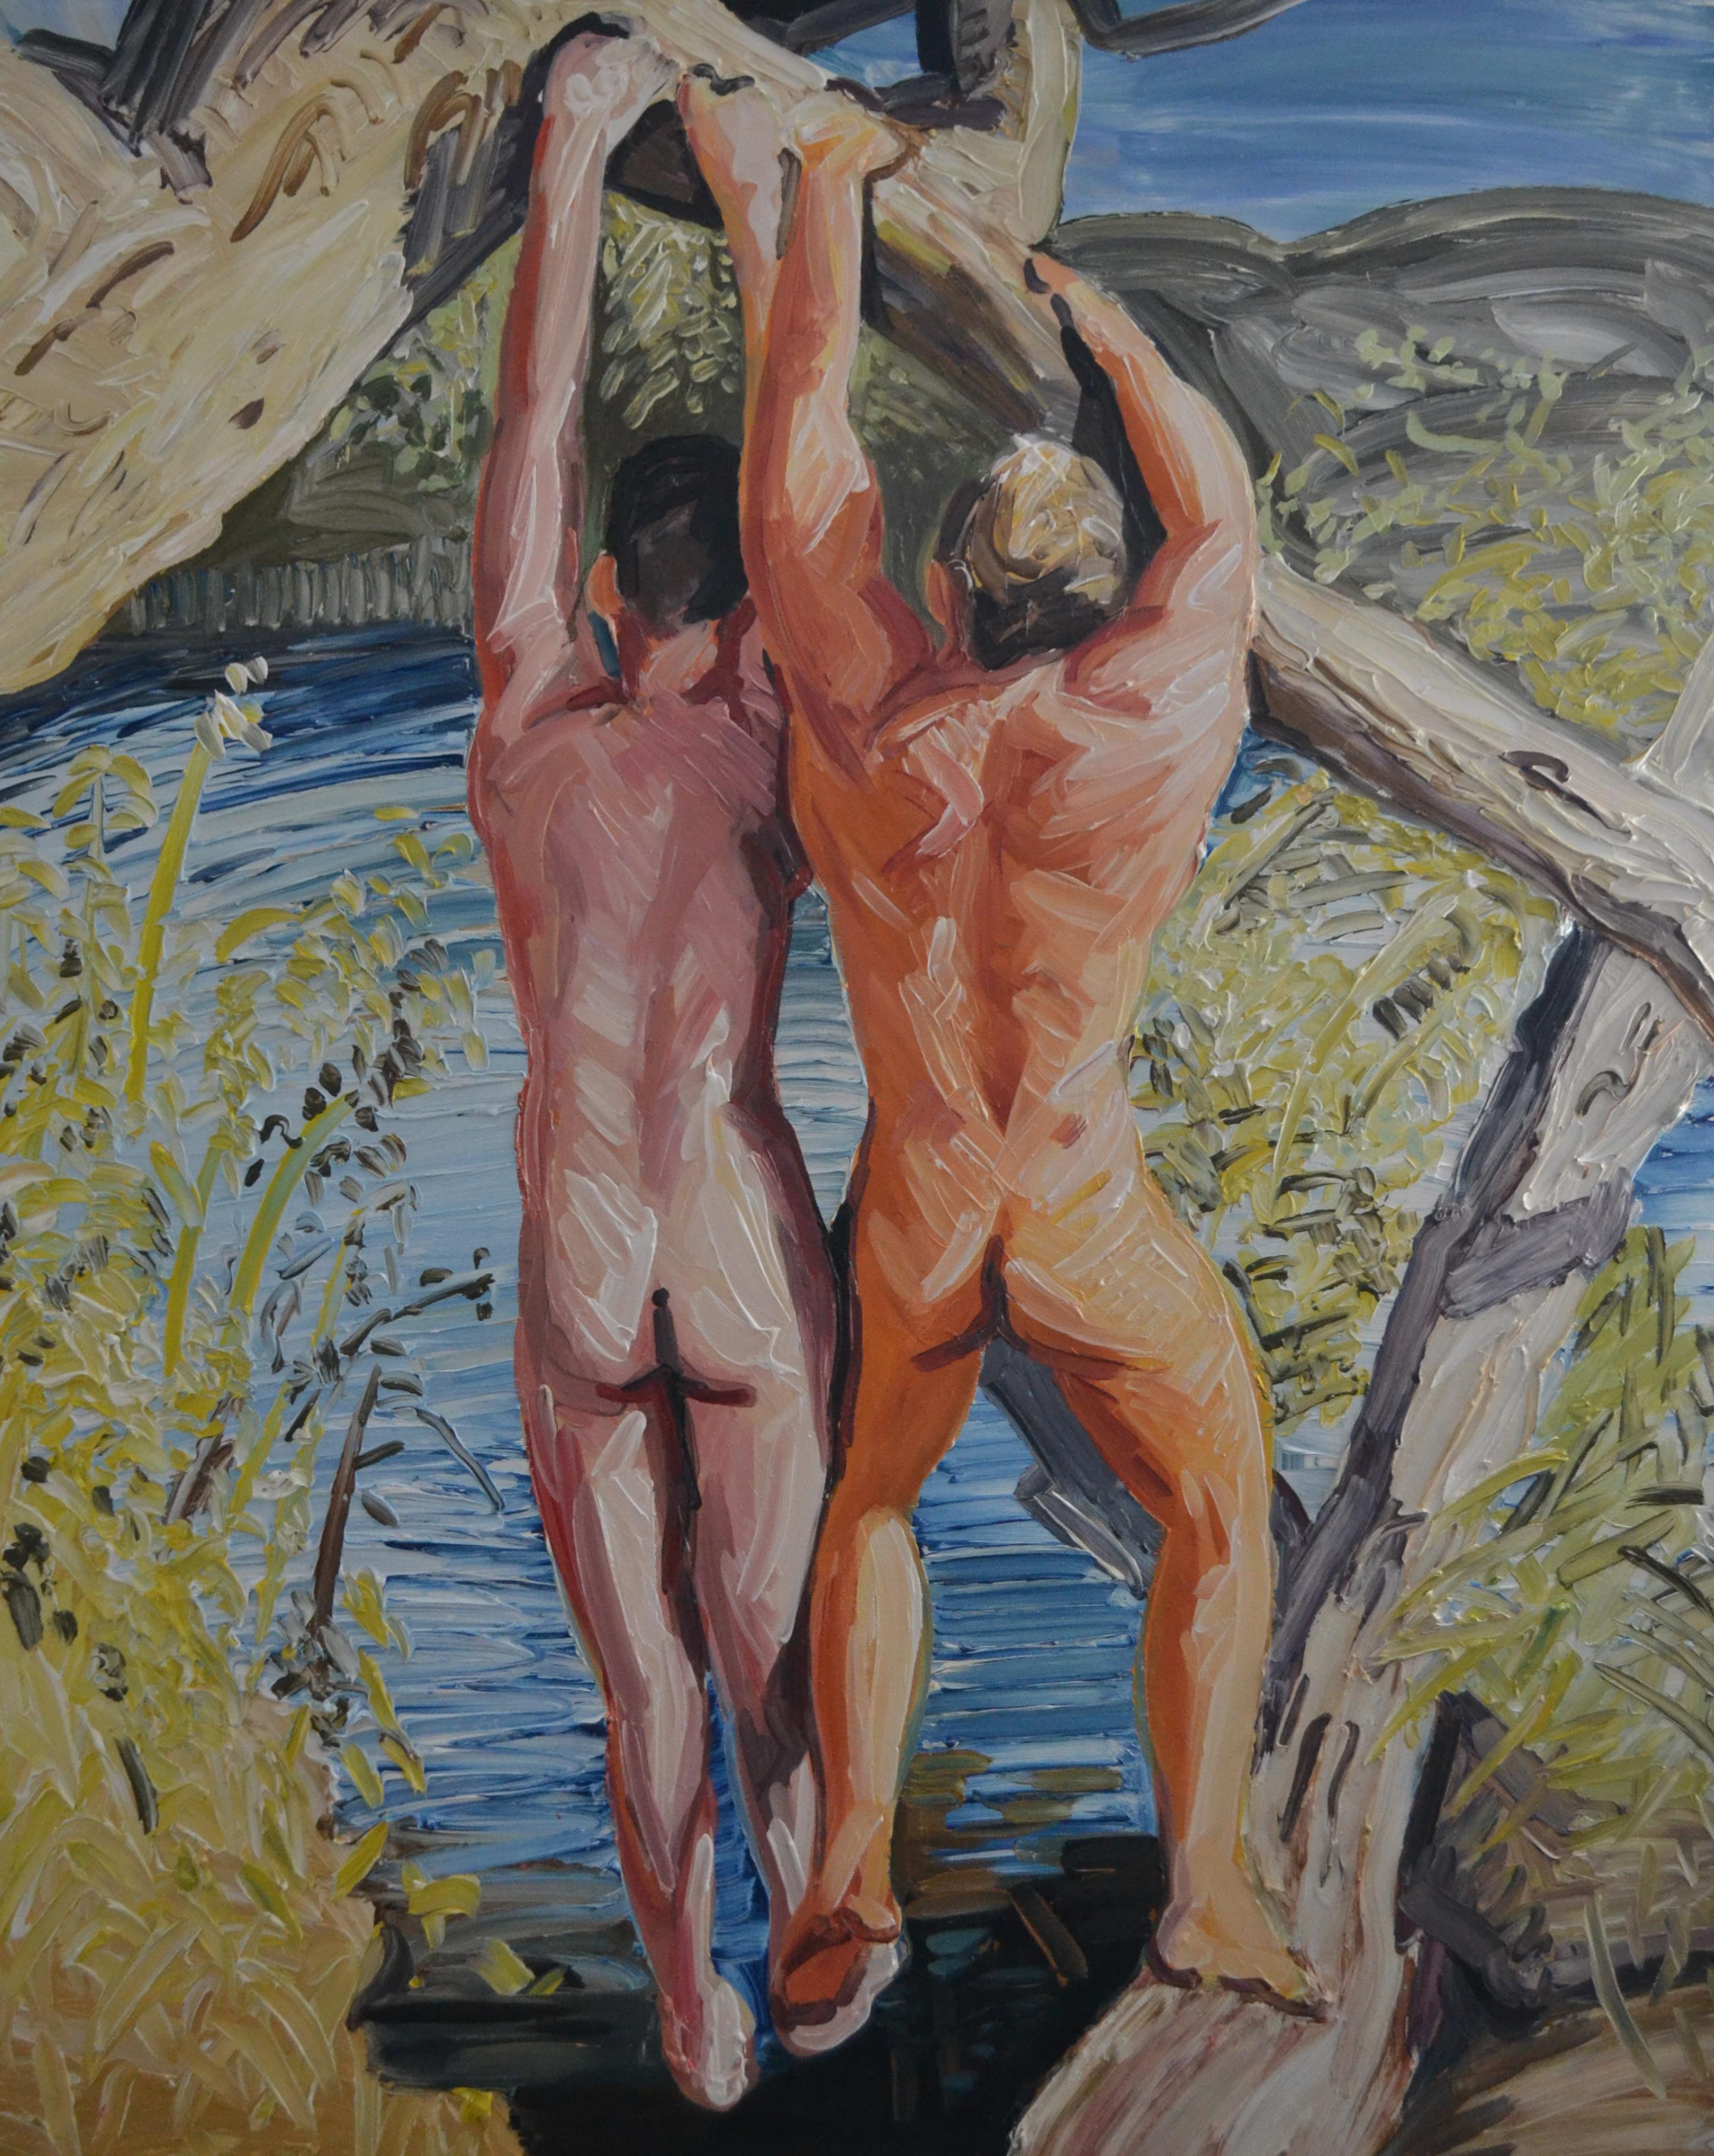 Summer 9 - Contemporary Expressive, Figurative Oil Painting, Male Nude Series